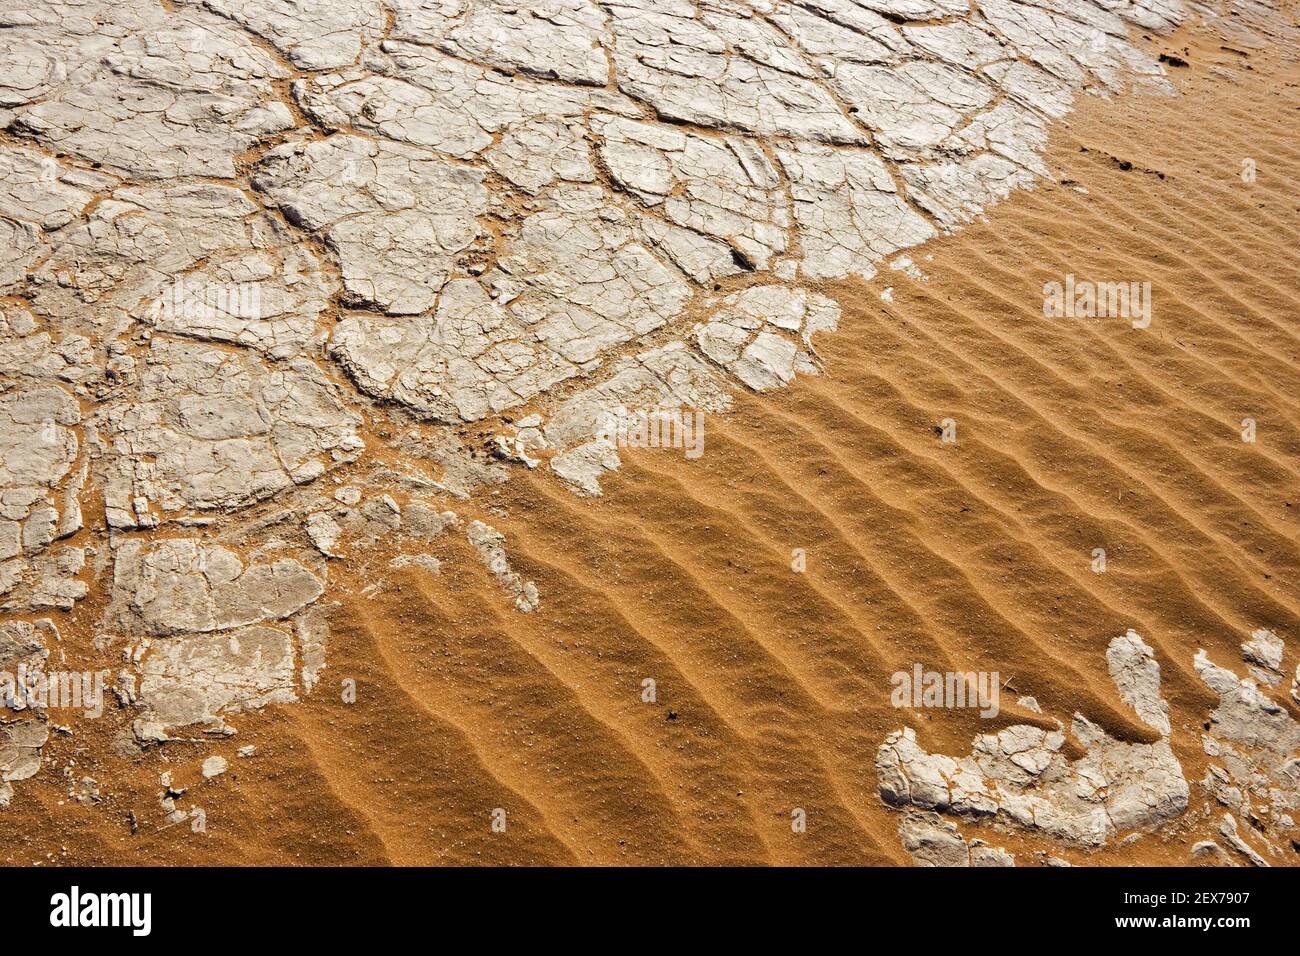 Sand and dried-out clay ground, Deadvlei, Namib Desert, Namibwueste, Namibia, Africa, sand and dried-out clay ground, Namib Dese Stock Photo